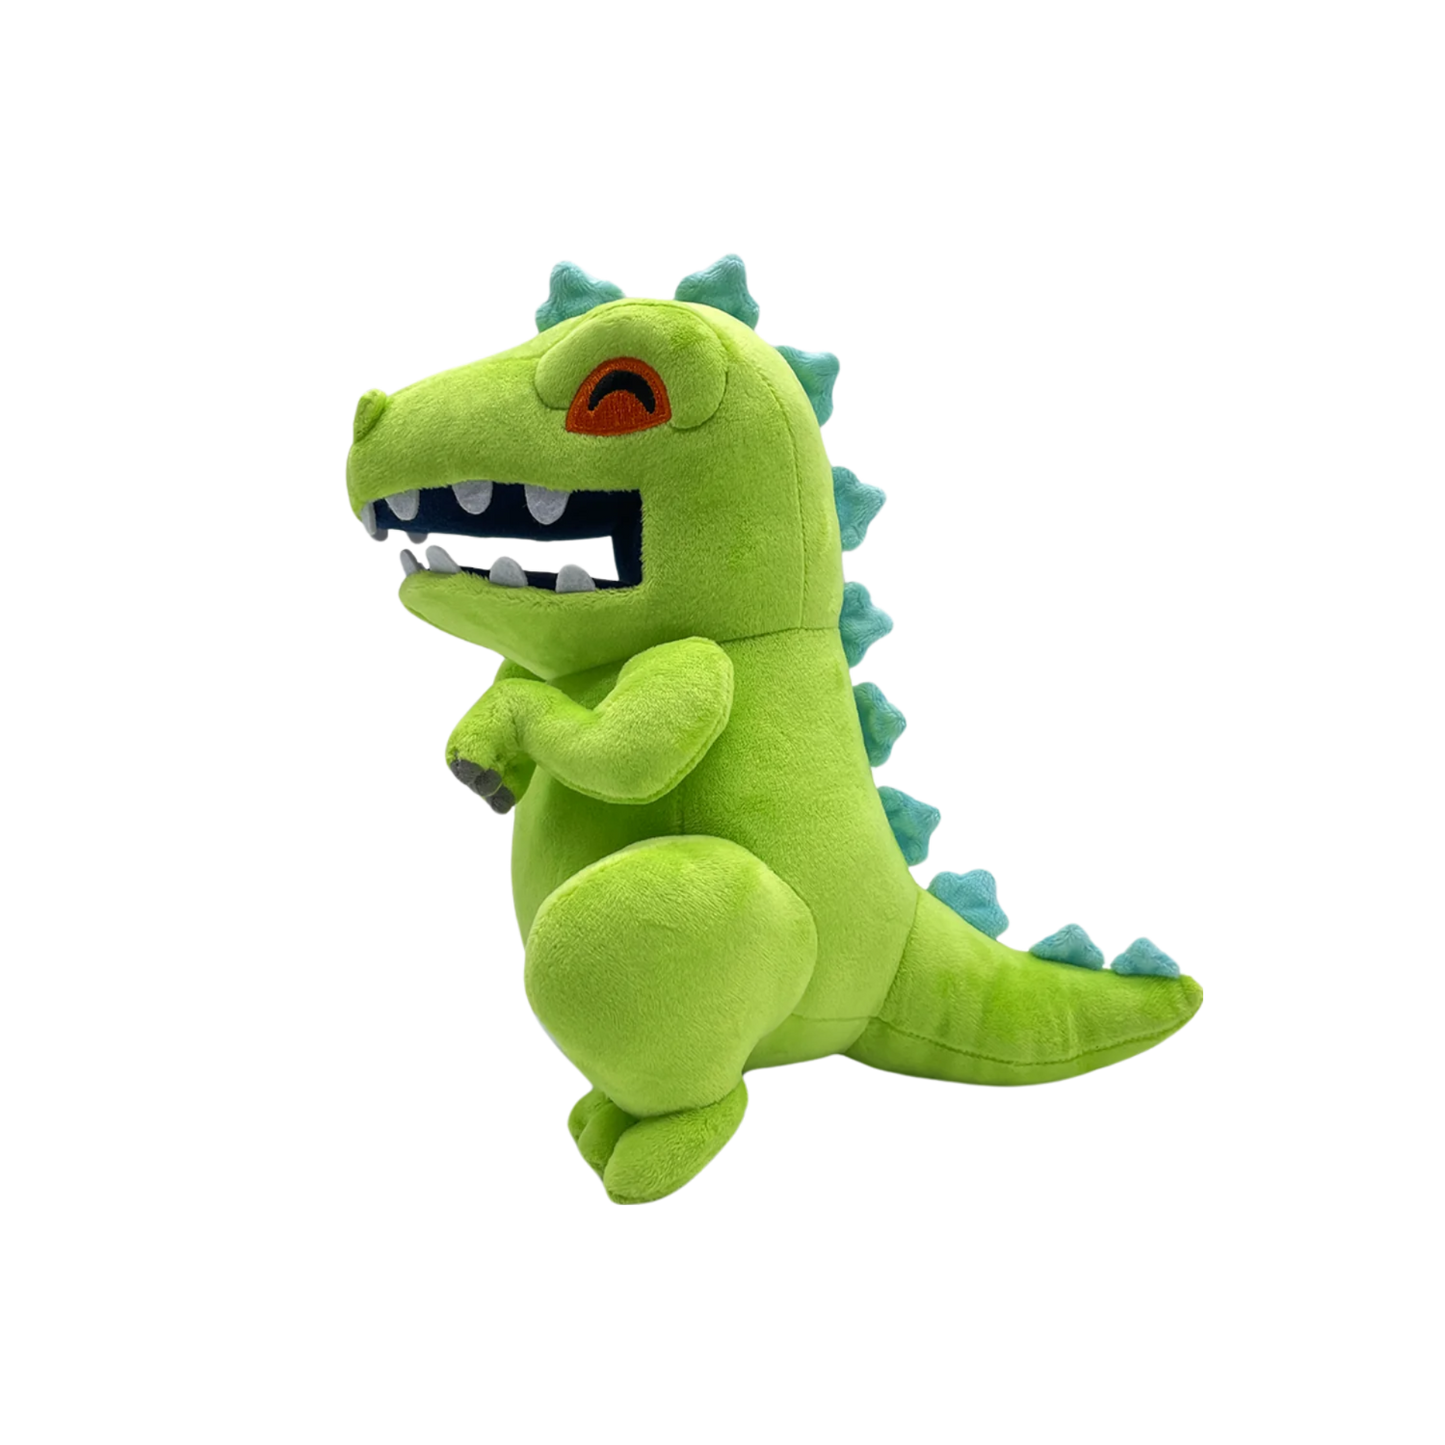 Rugrats Reptar Youtooz Plush (9in)